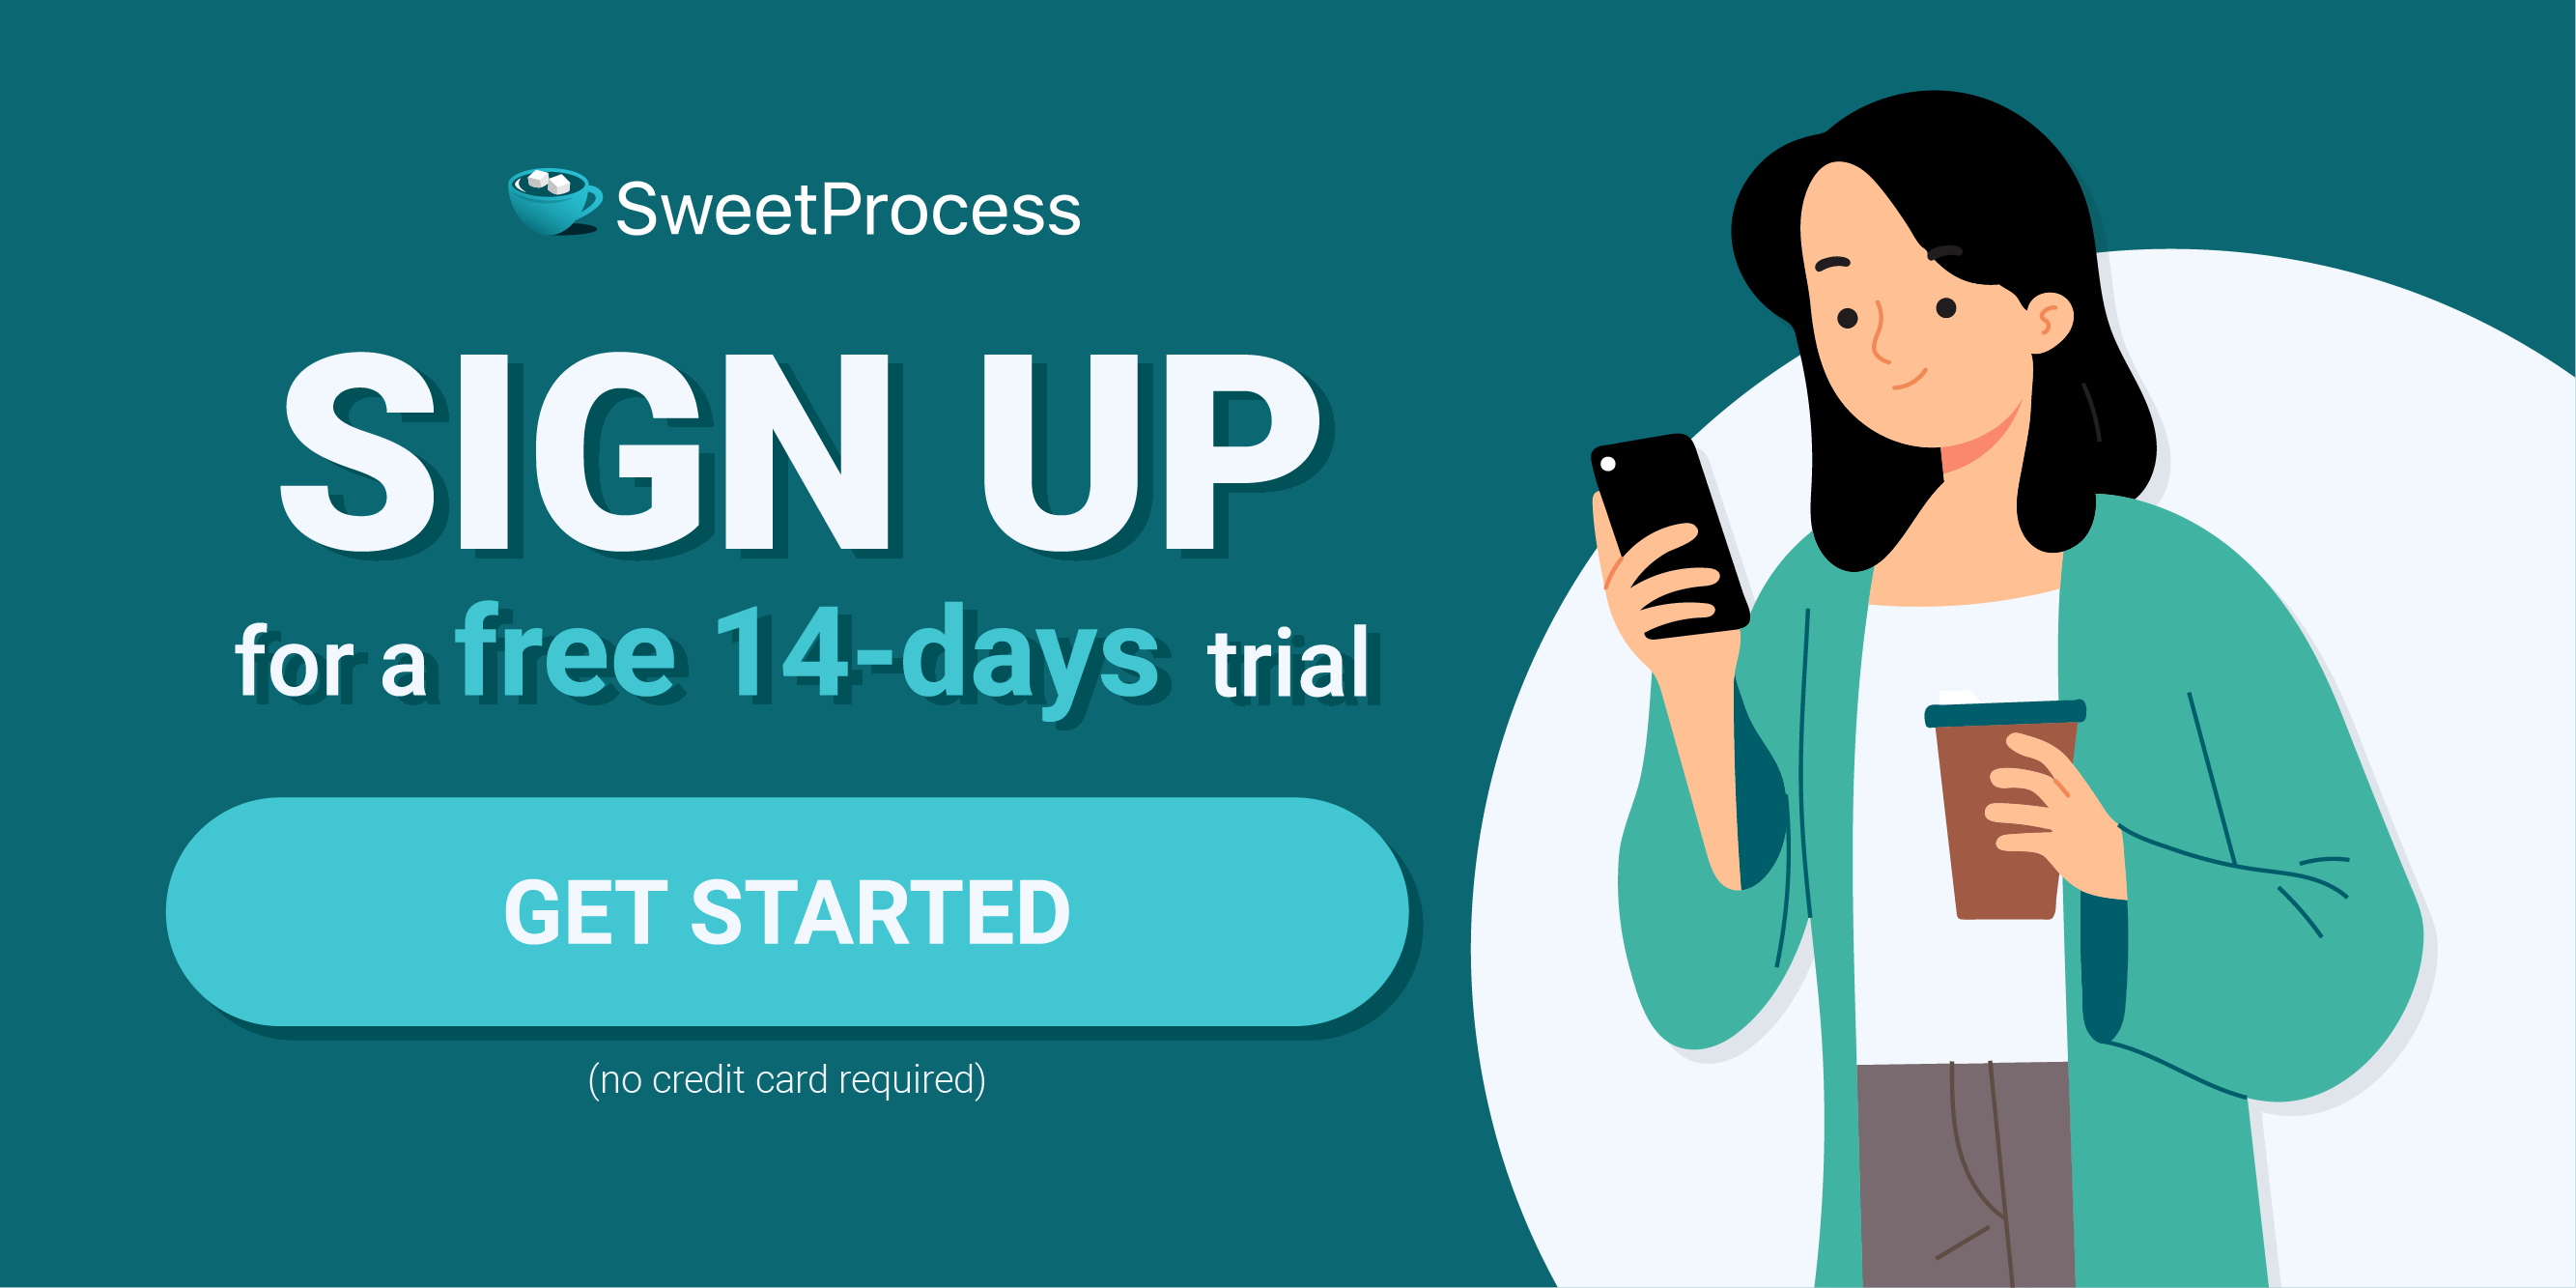 Sign Up for a free 14-days trial